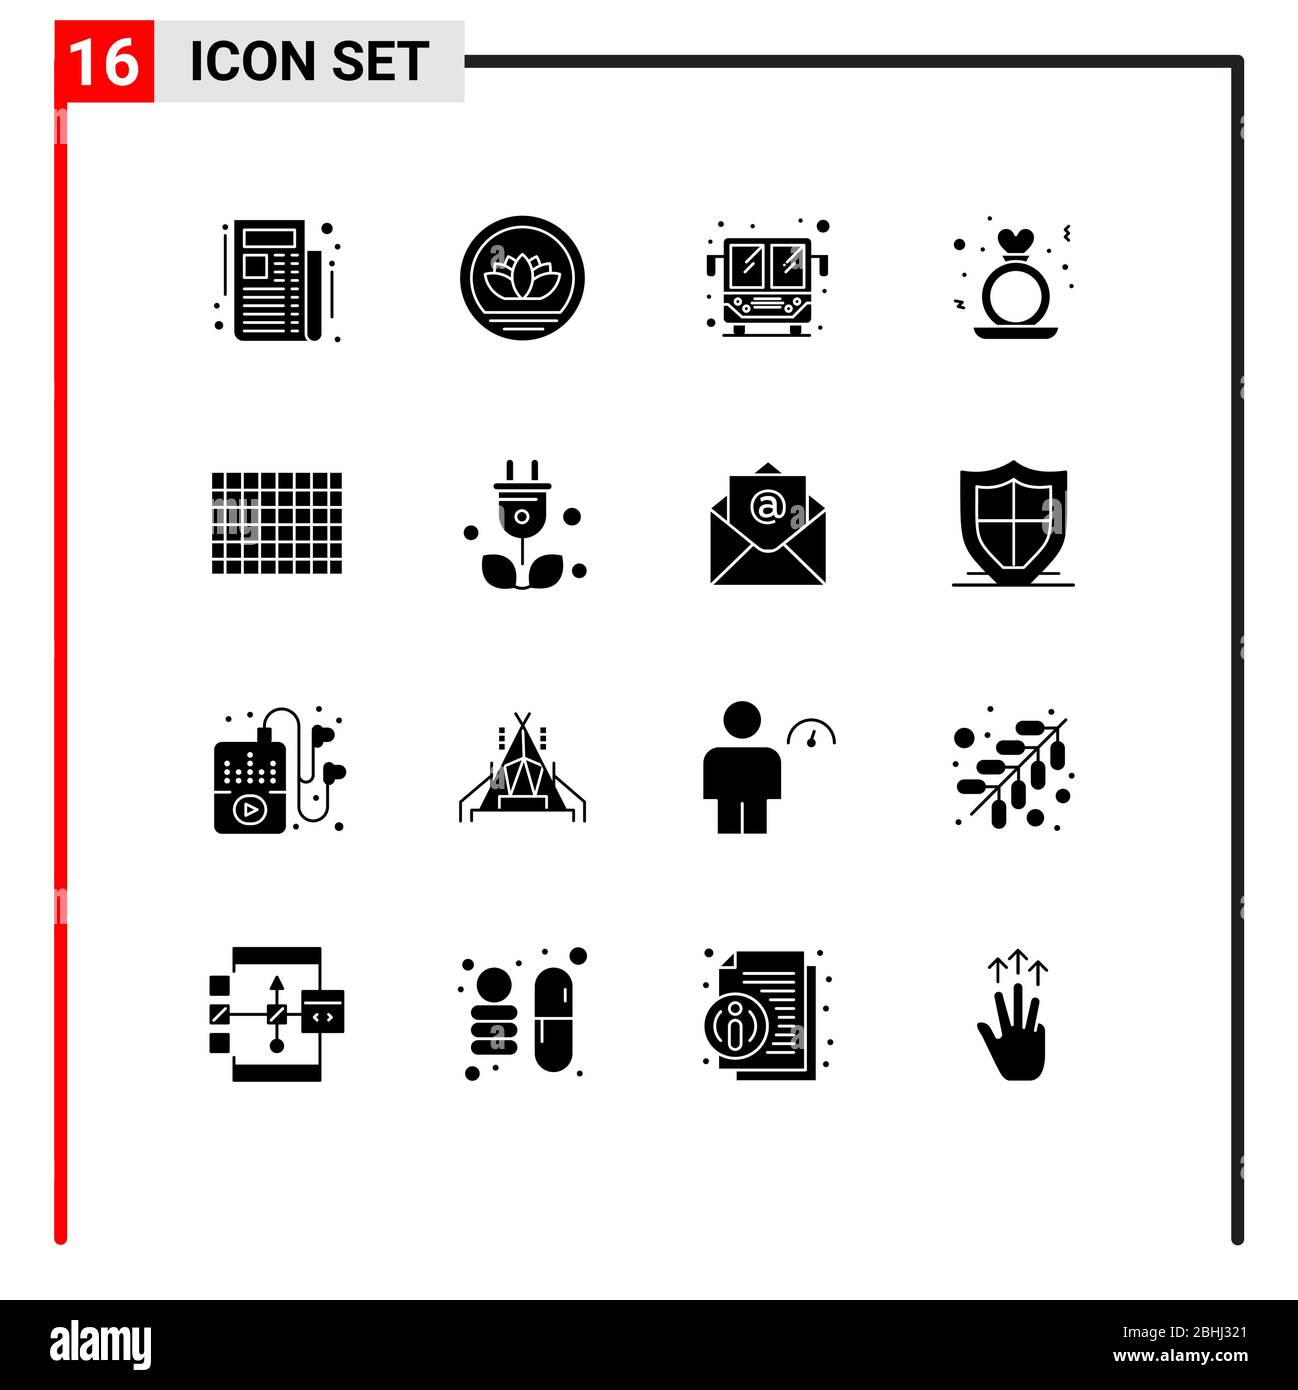 Set of 16 Modern UI Icons Symbols Signs for food, candy, public bus, women, proposal Editable Vector Design Elements Stock Vector